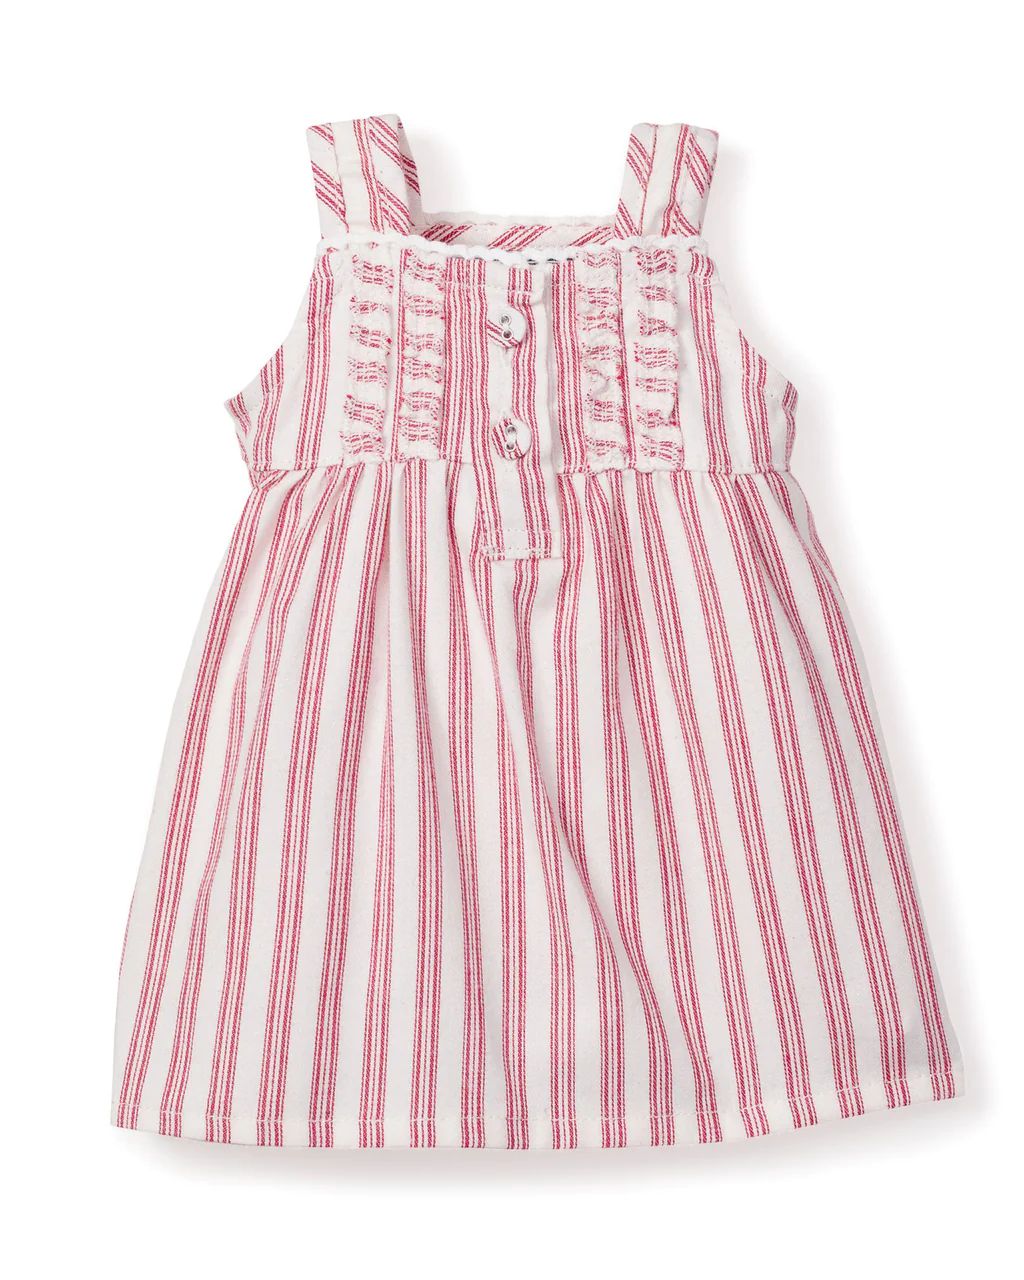 Antique Red Ticking Doll Nightgown | Petite Plume